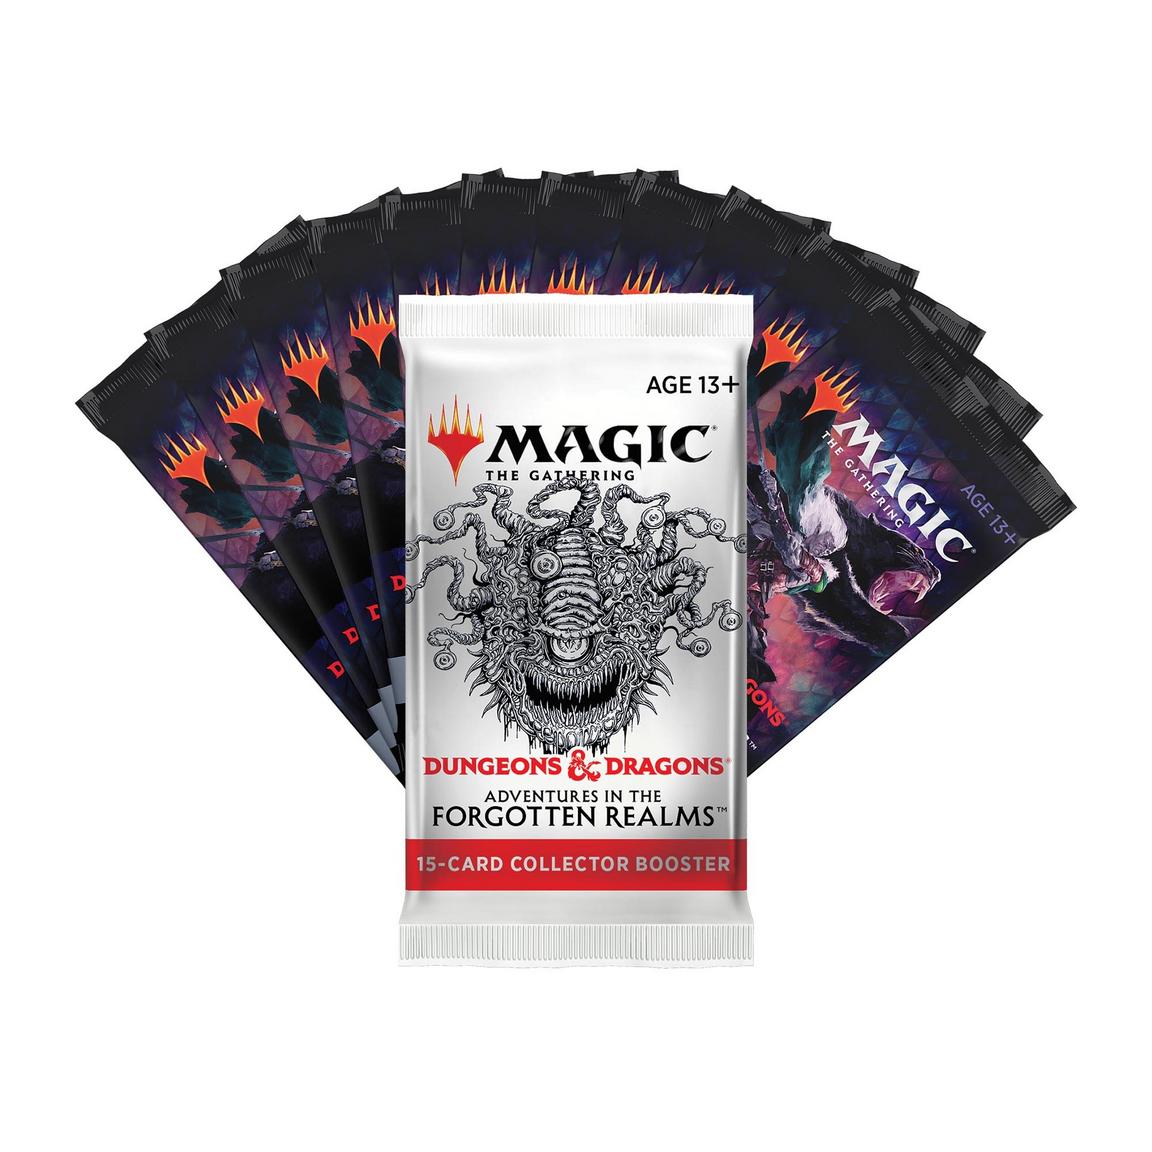 Magic the Gathering: Adventures in the Forgotten Realms (Dungeons & Dragons) Bundle Gift Edition